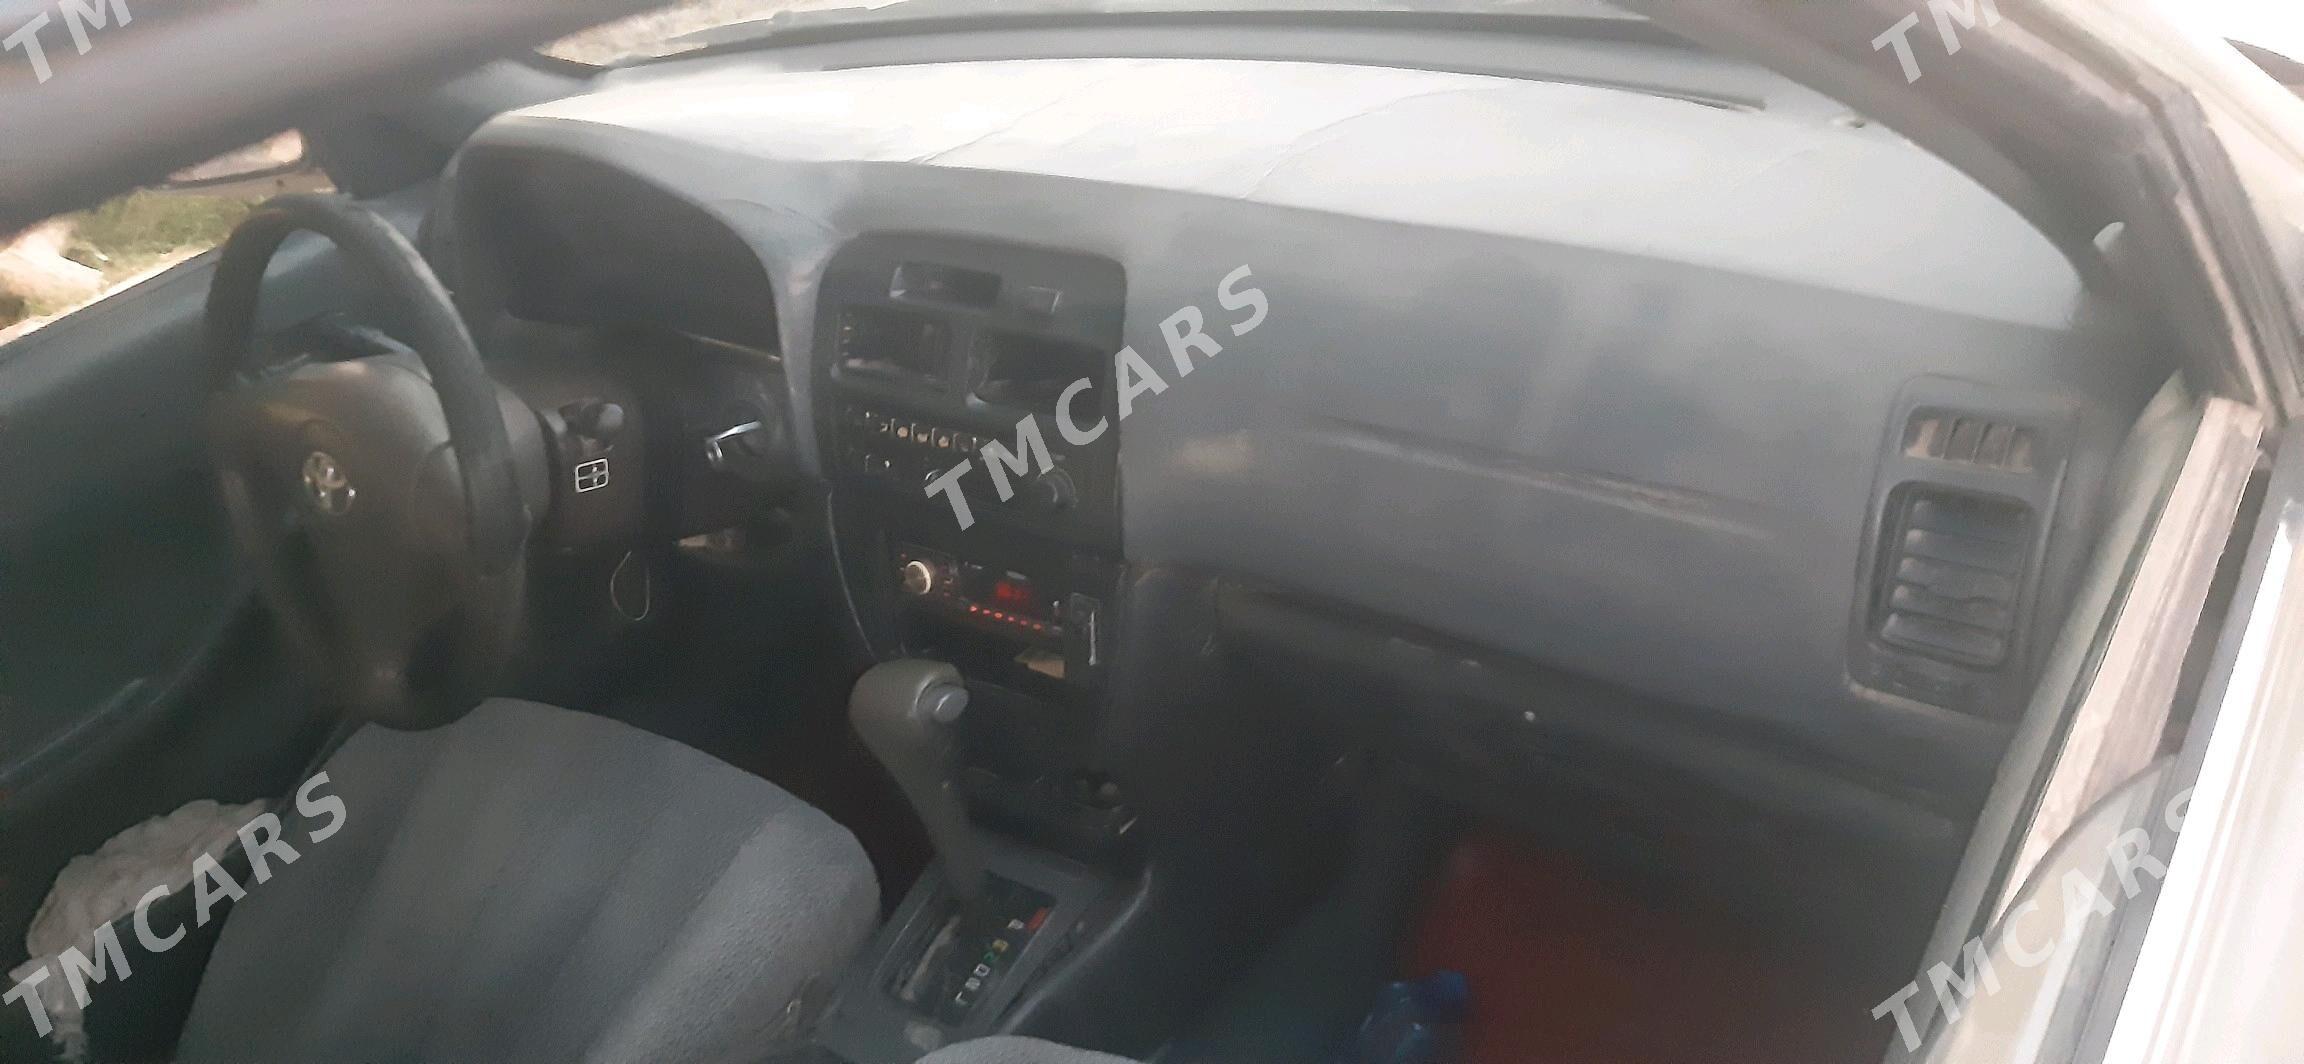 Toyota Camry 1993 - 14 000 TMT - Mary - img 3